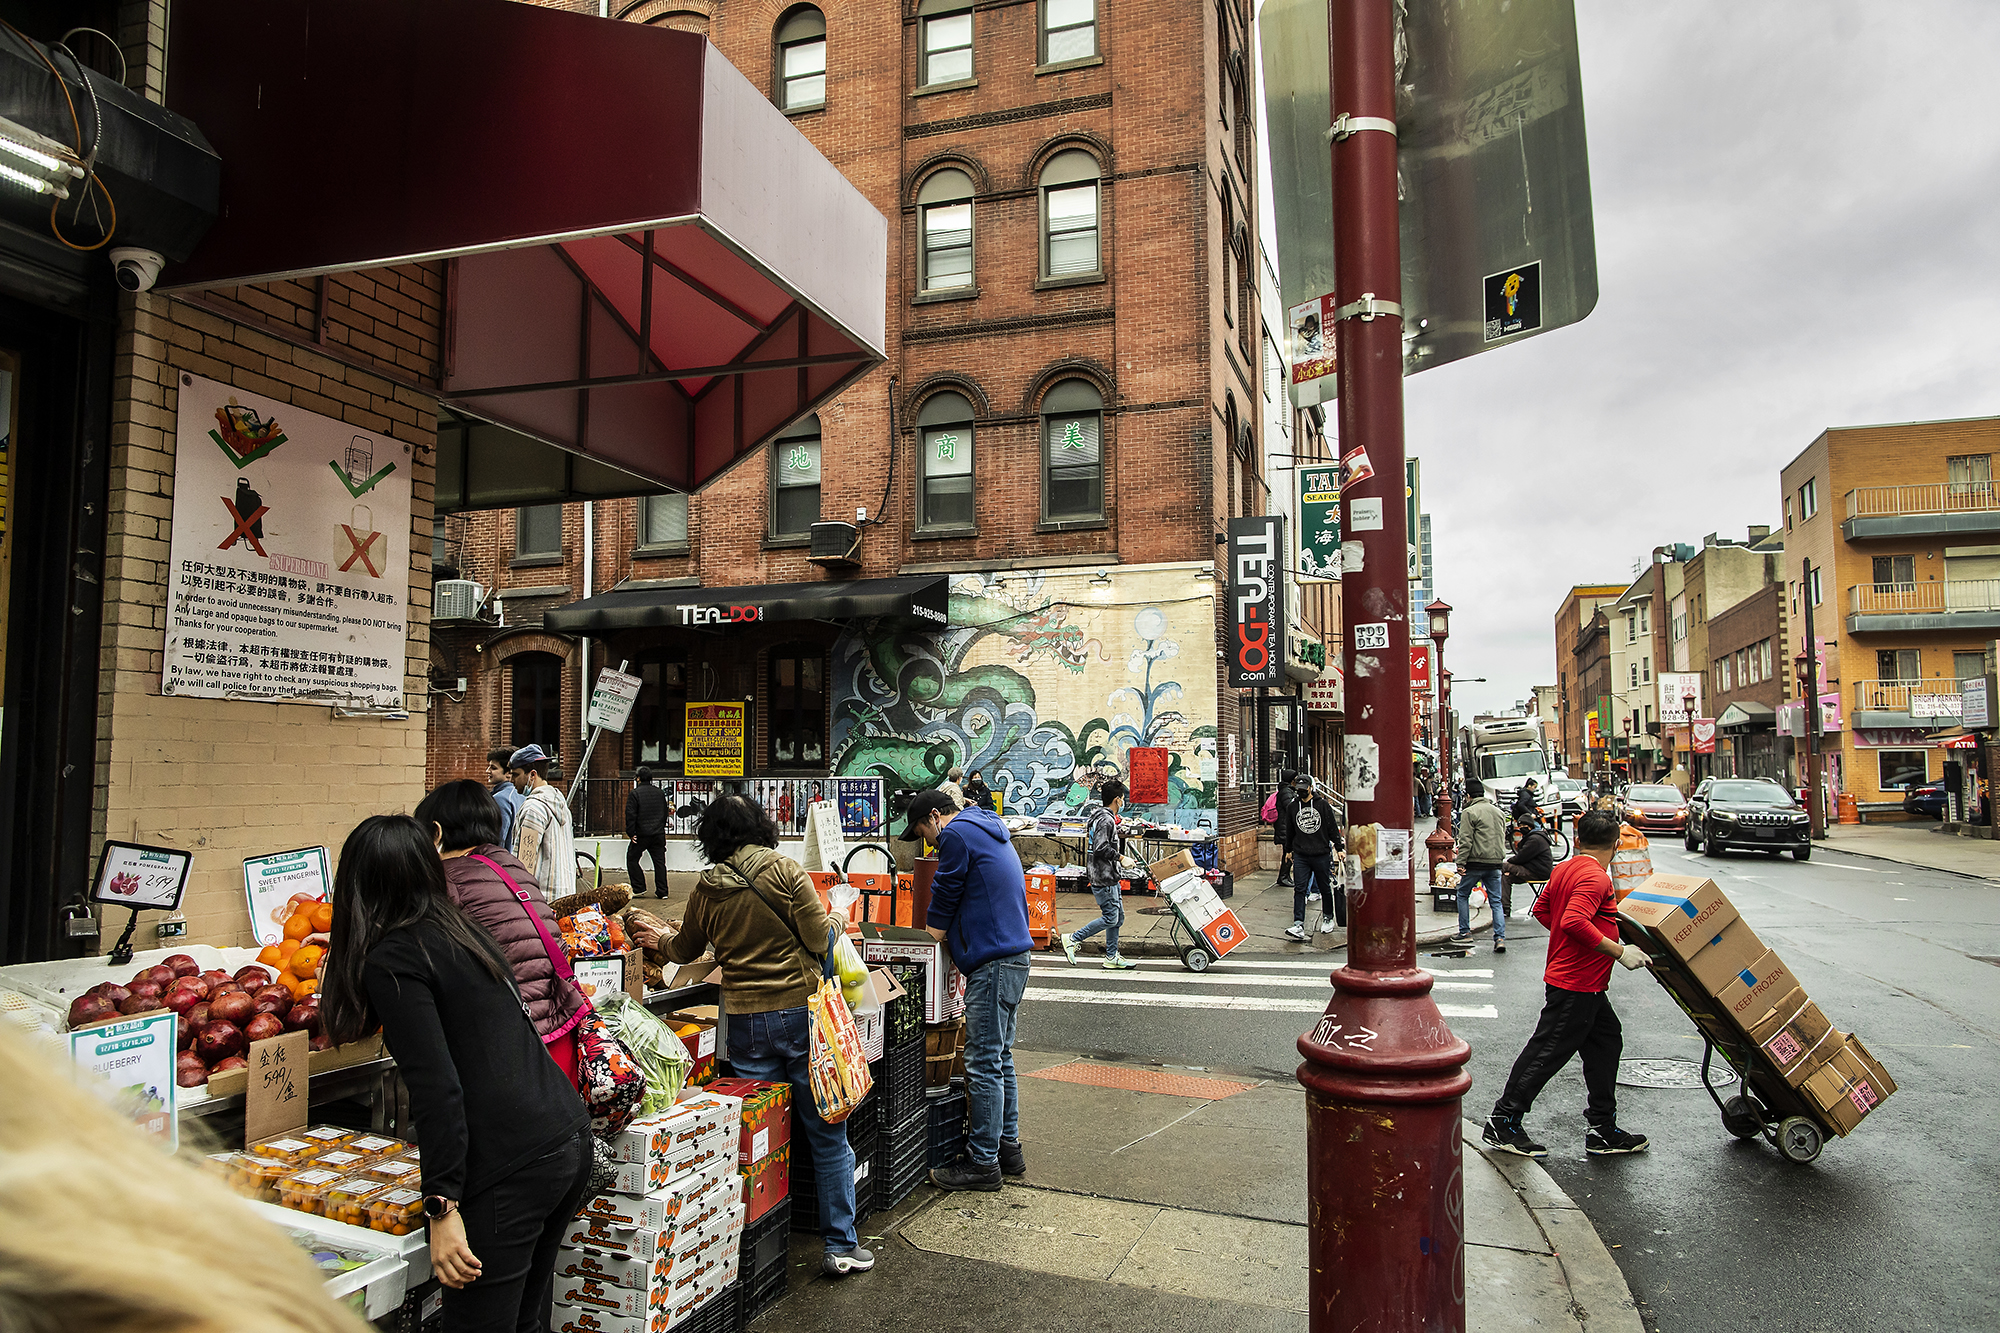 People shop at an open air market in Chinatown